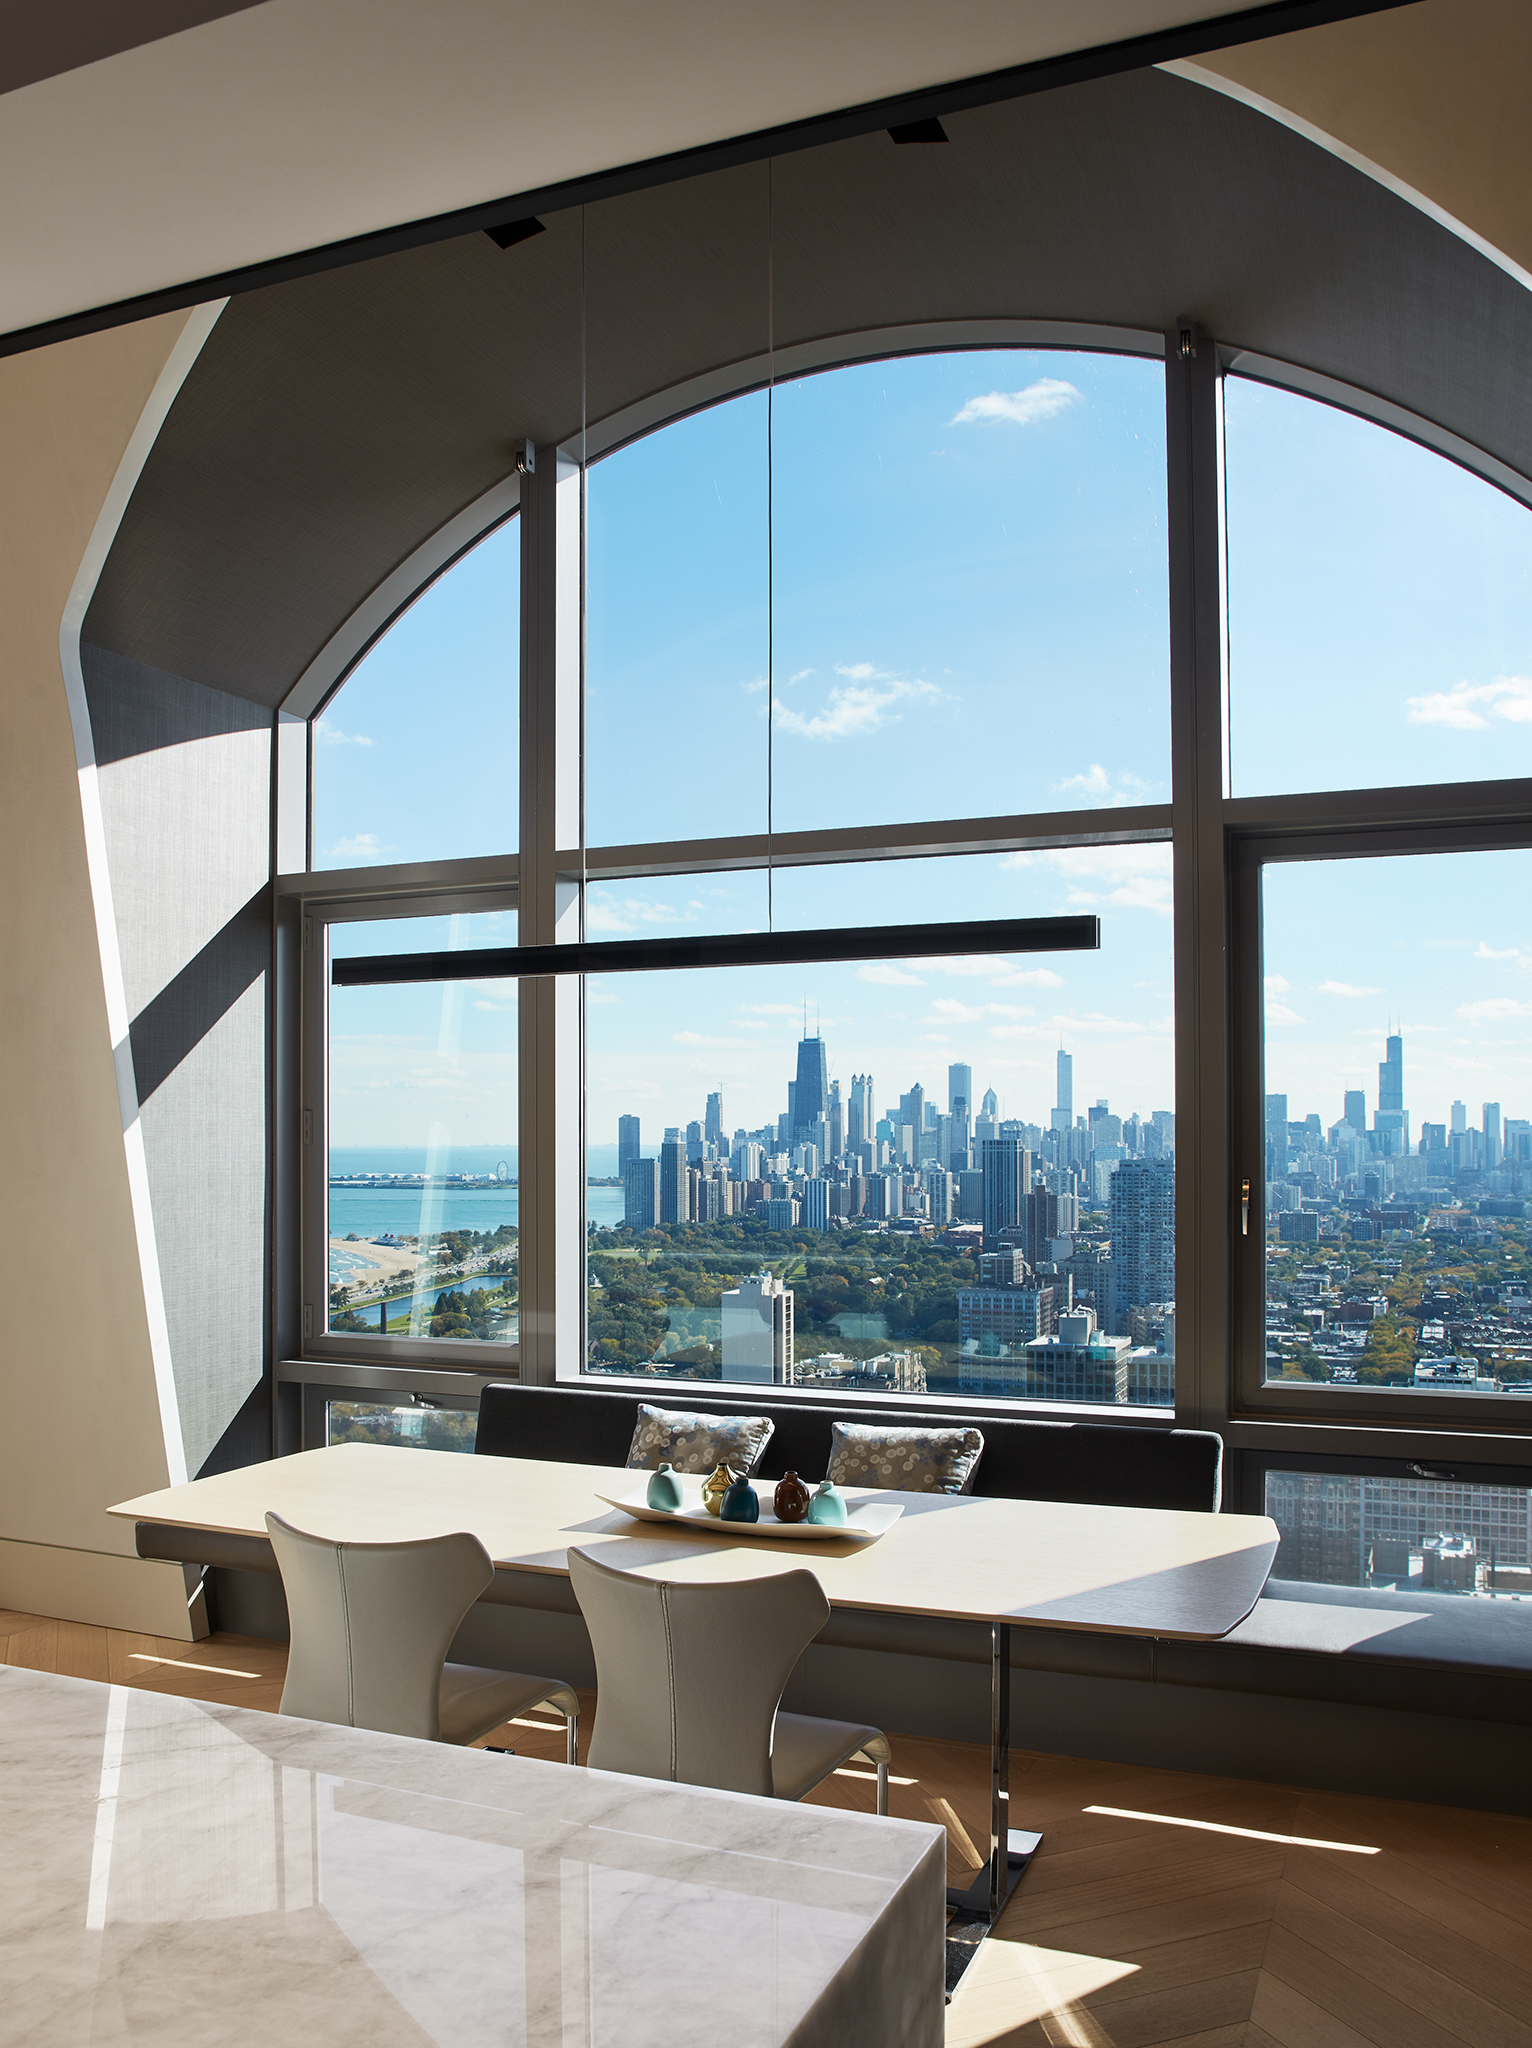  Chicago Penthouse  Wheeler Kearns  Chicago, IL     Return to Projects  